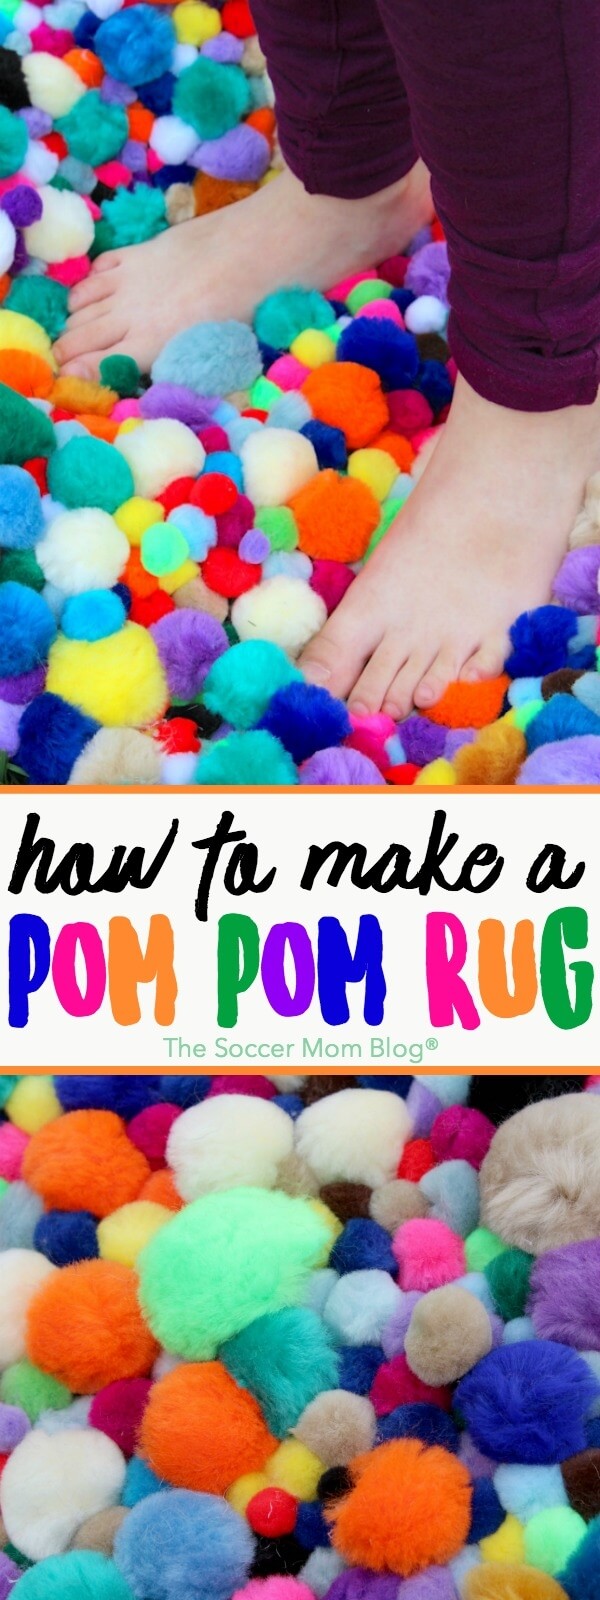 Add a burst of color to any room with this vibrant Pom Pom Rug - an easy DIY craft that's perfect for a kids room, bathroom, reading nook, or anywhere! (FREE photo step-by-step tutorial inside)